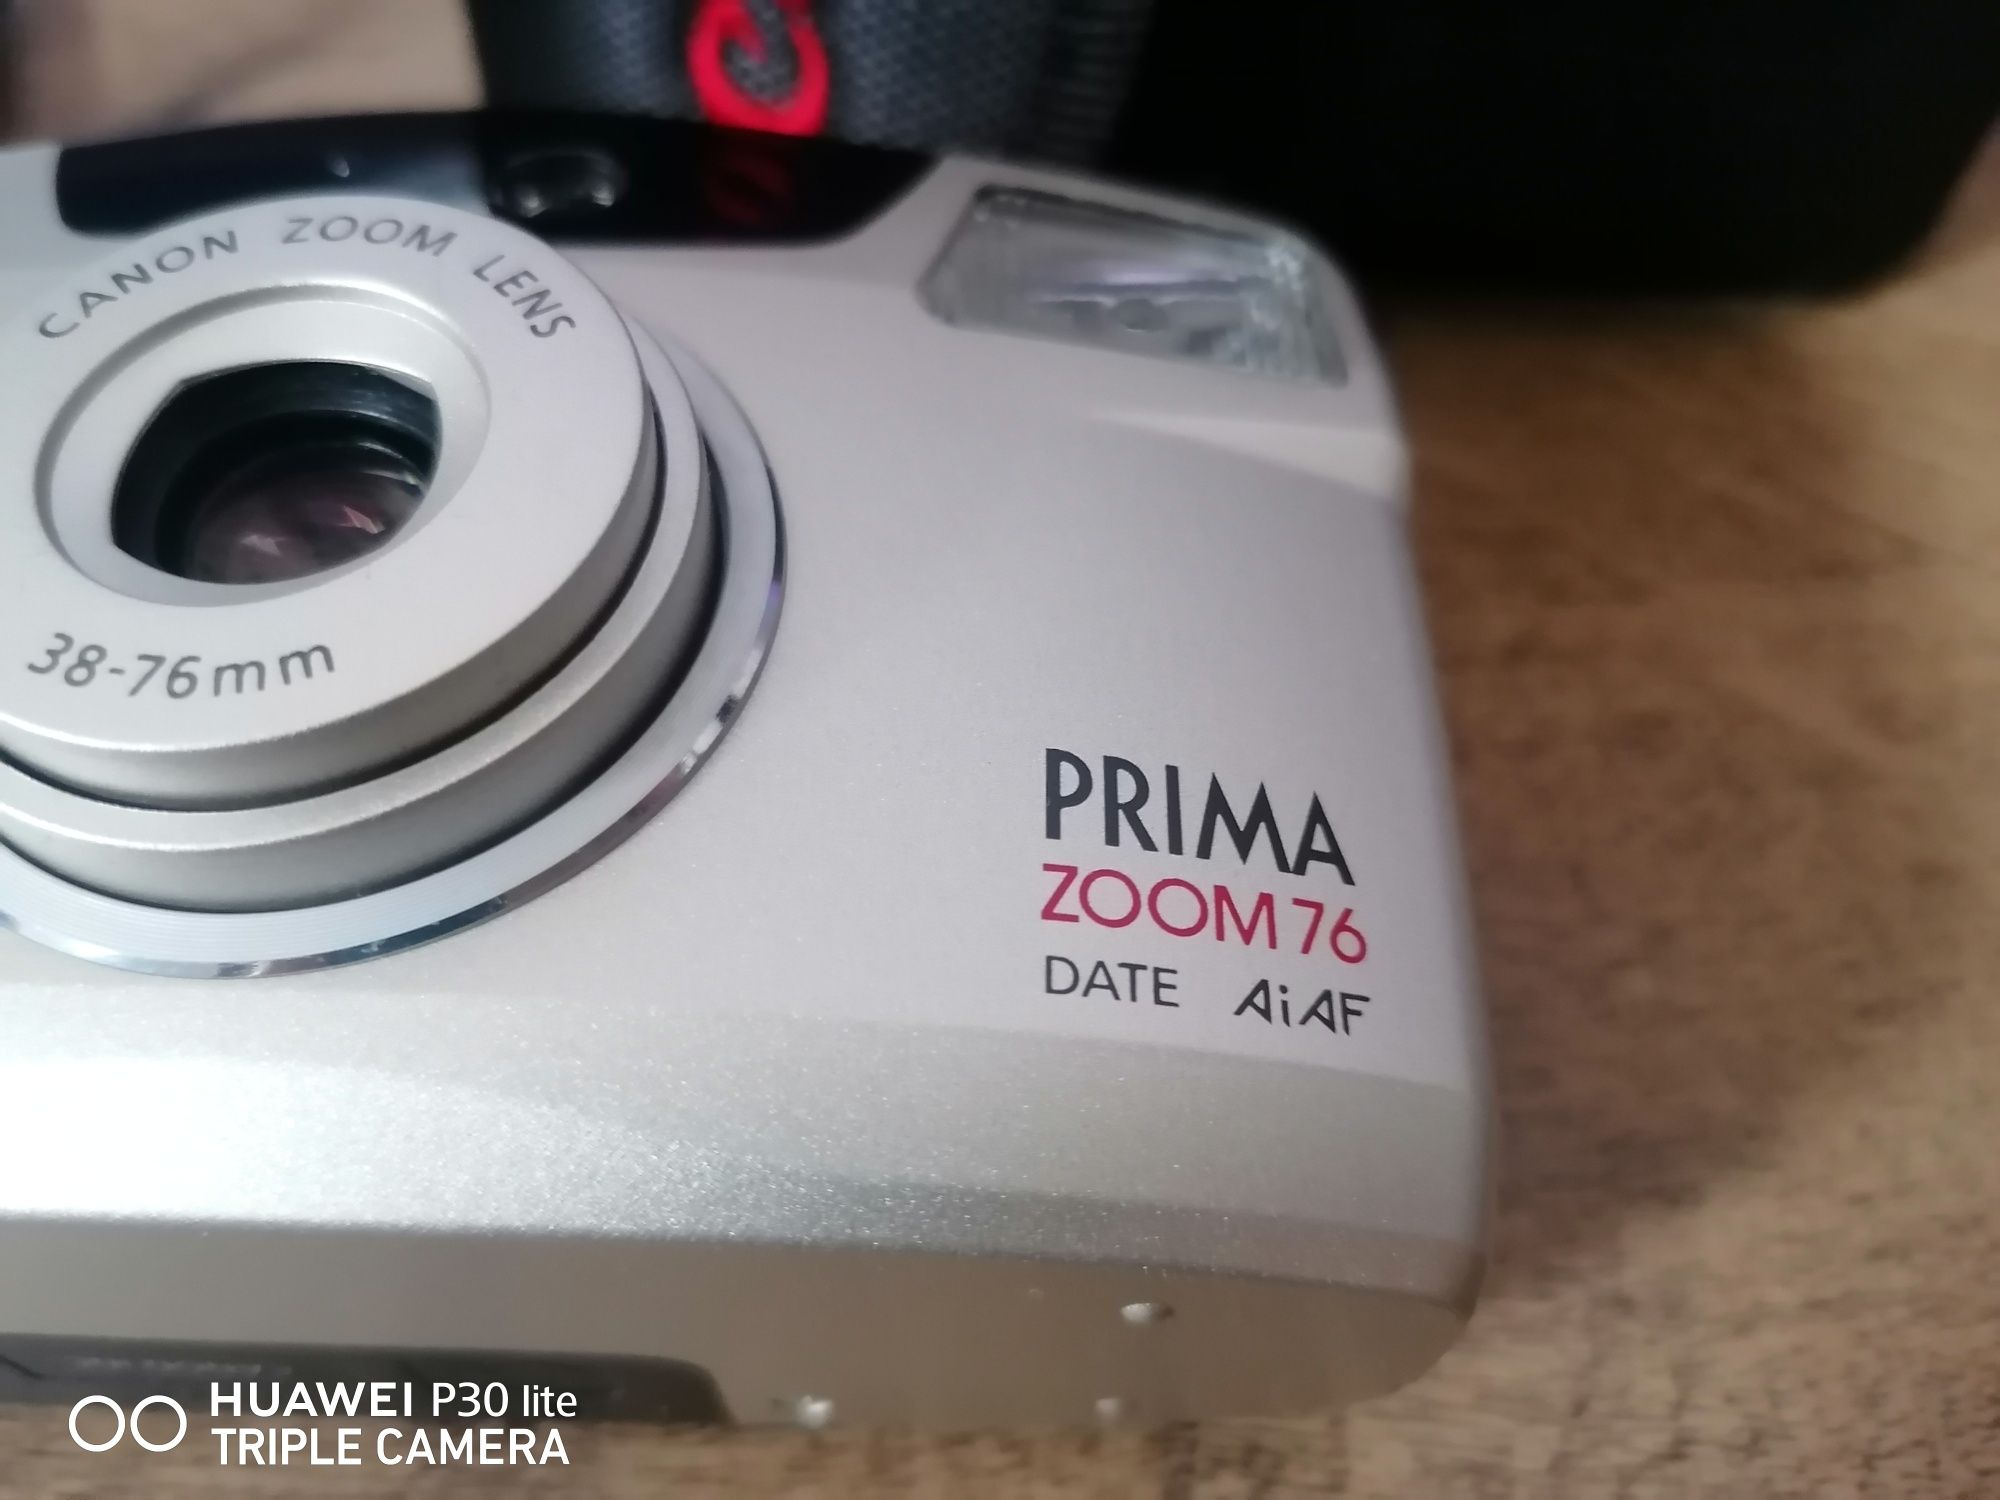 Canon Prima Zoom 76 AiAf Date.